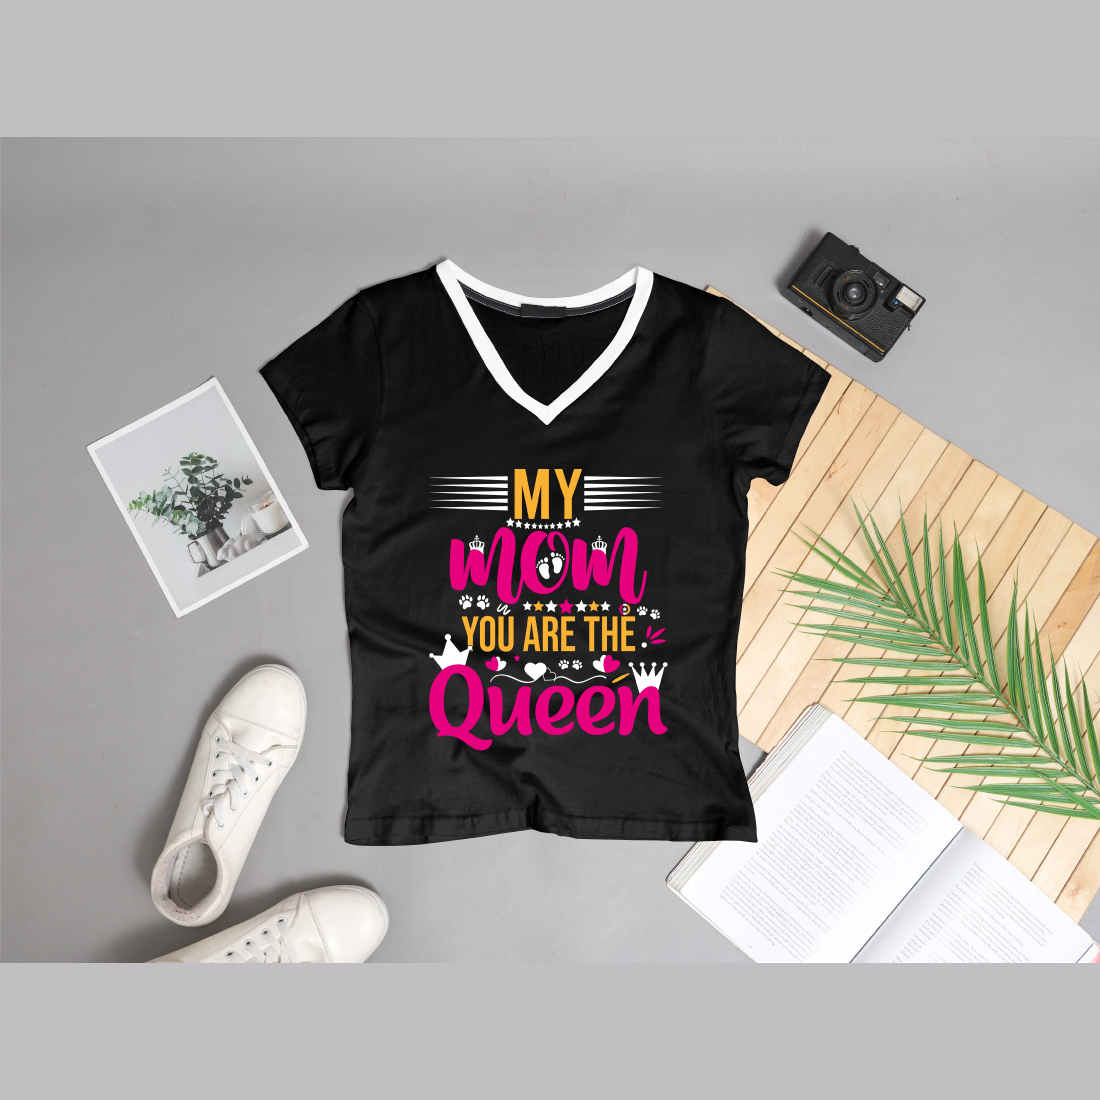 My mom you are the Queen Mother's Day t-shirt Mom t-shirt cover image.